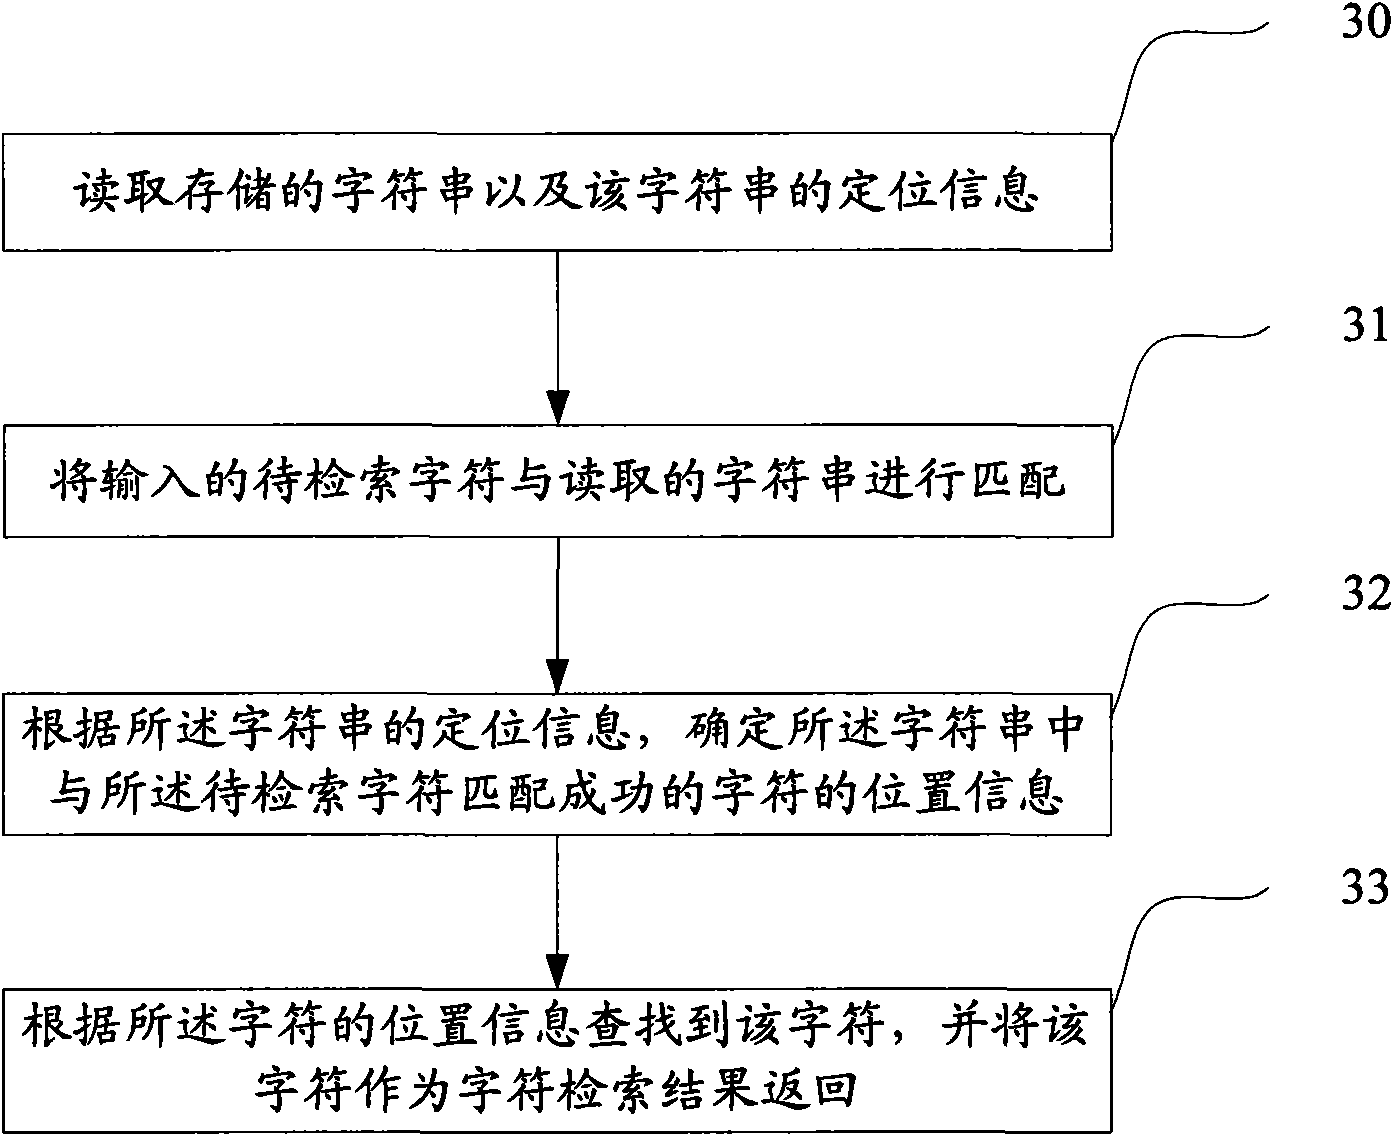 Method for text message processing, text message output and character retrieval in electronic document and device thereof